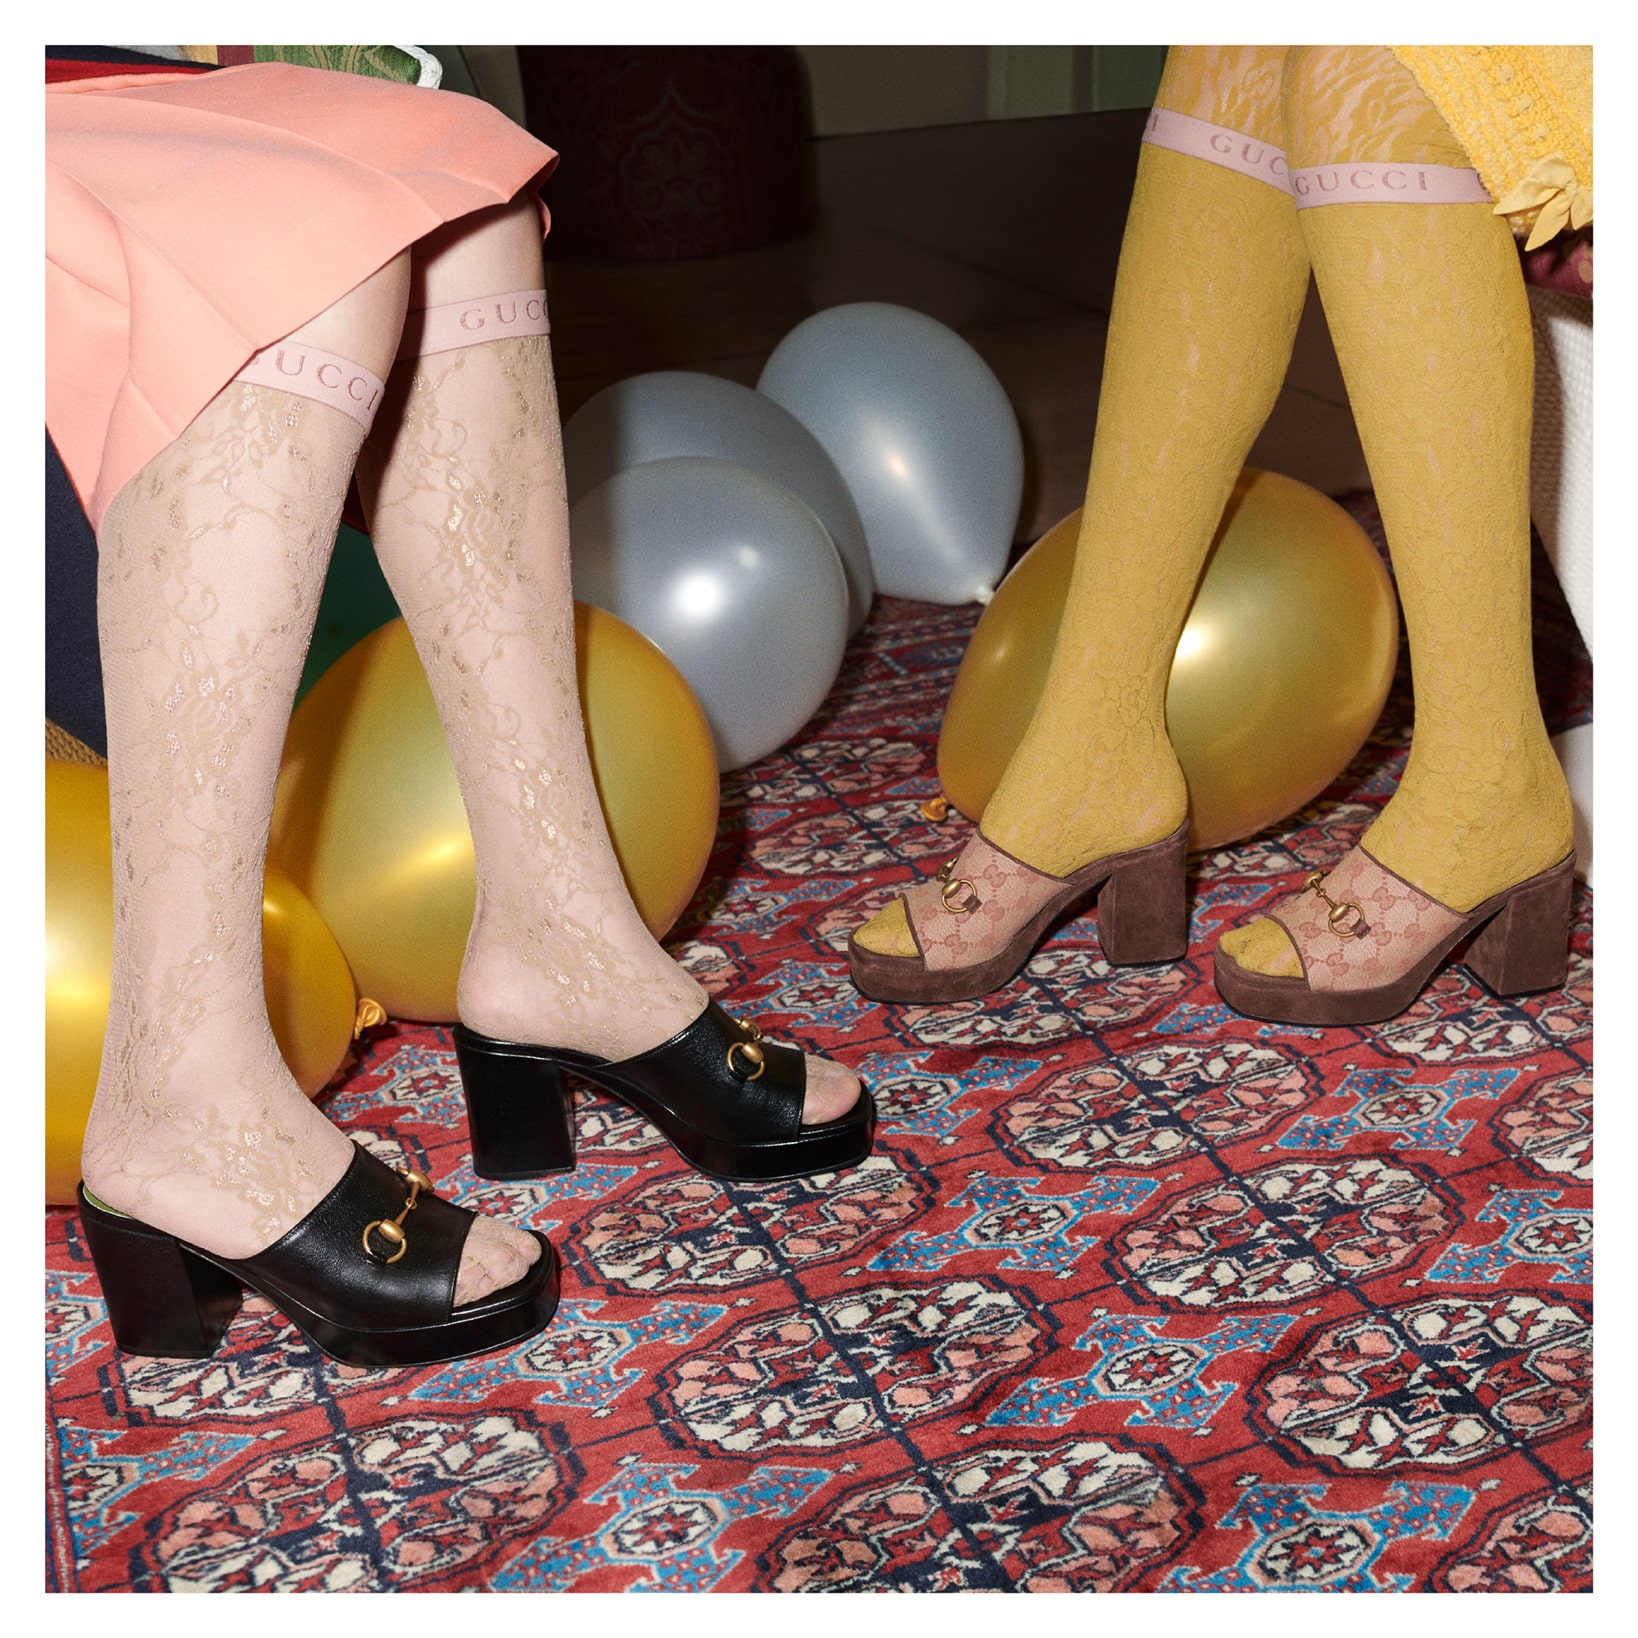 gucci on X: "From #GucciCruise20 by #AlessandroMichele, mid-heel platform  sandals featuring a chunky heel and #GucciZumi low heel slides enhanced by  the Interlocking G Horsebit hardware. Discover more  https://t.co/ZFxVZwqDhk. https://t.co/cgi2jflTg8" / X